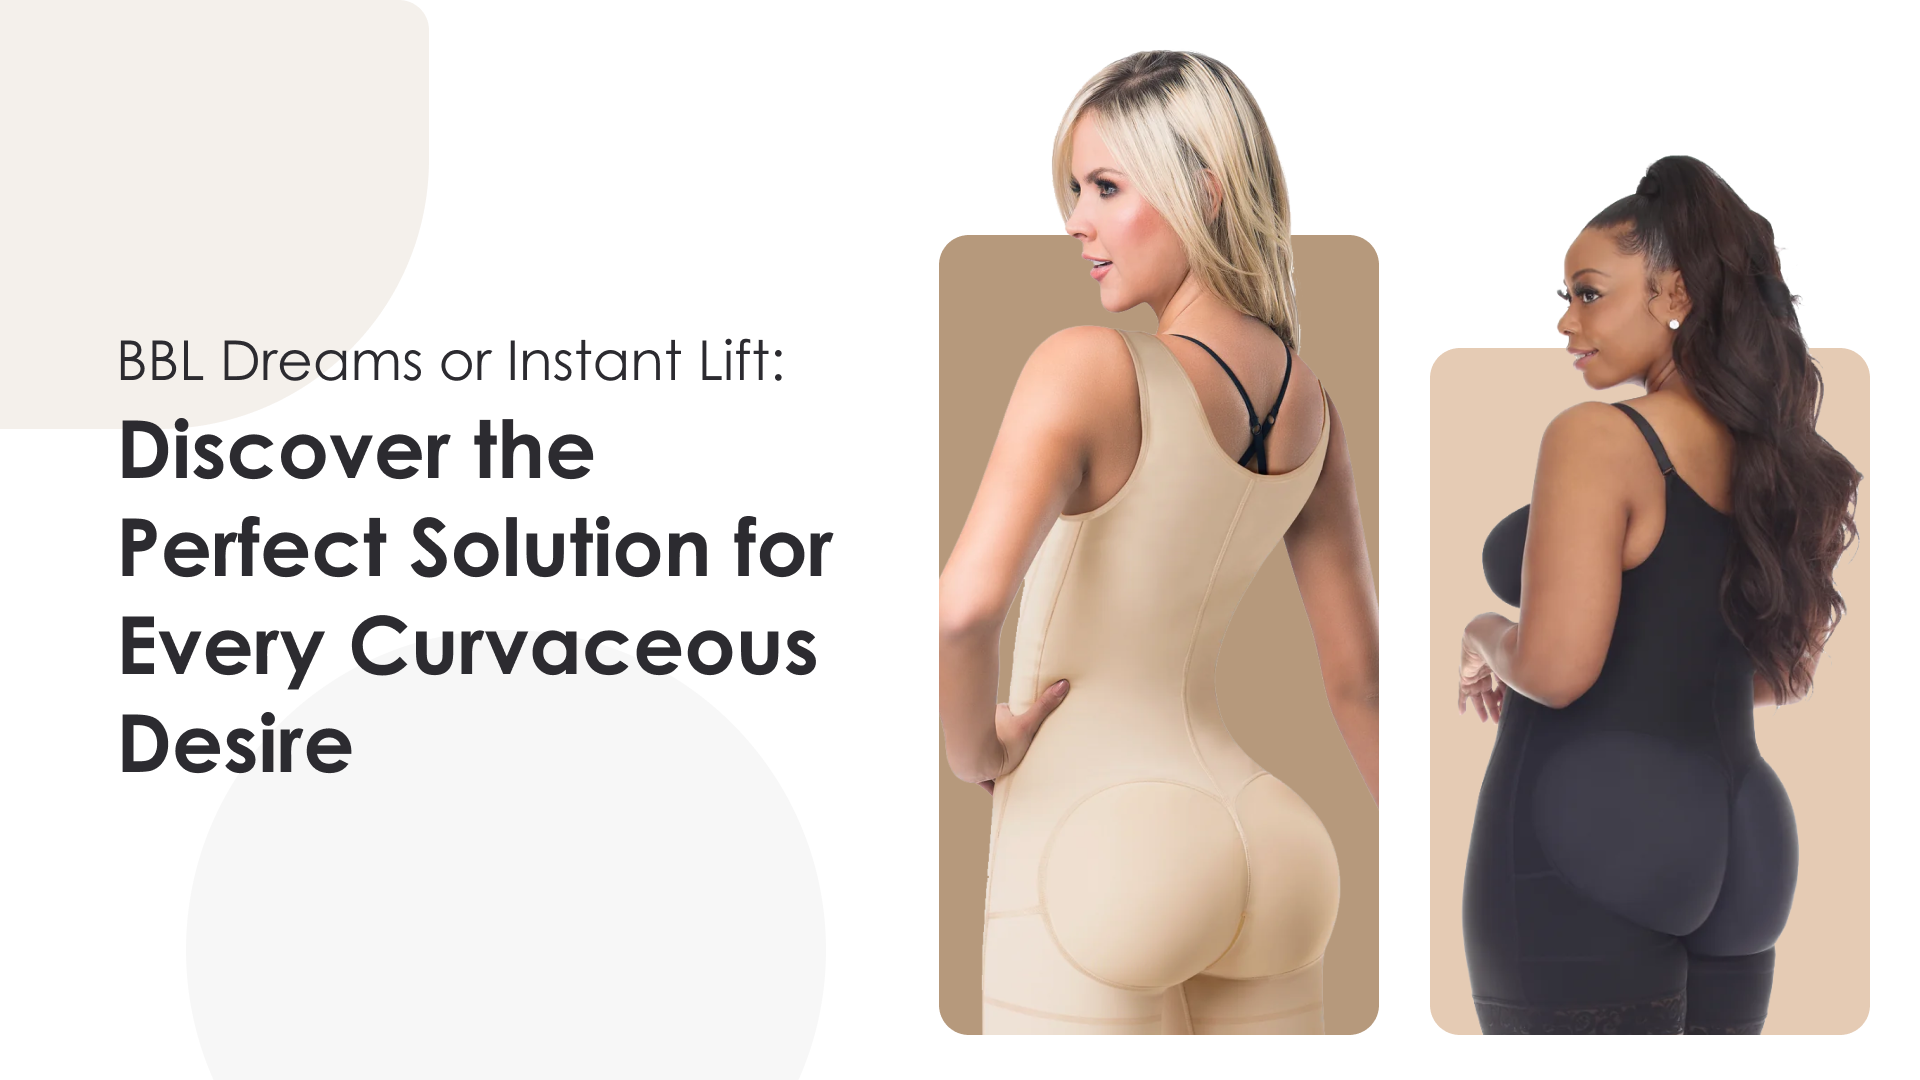 BBL Dreams or Instant Lift: Discover the Perfect Solution for Every Curvaceous Desire